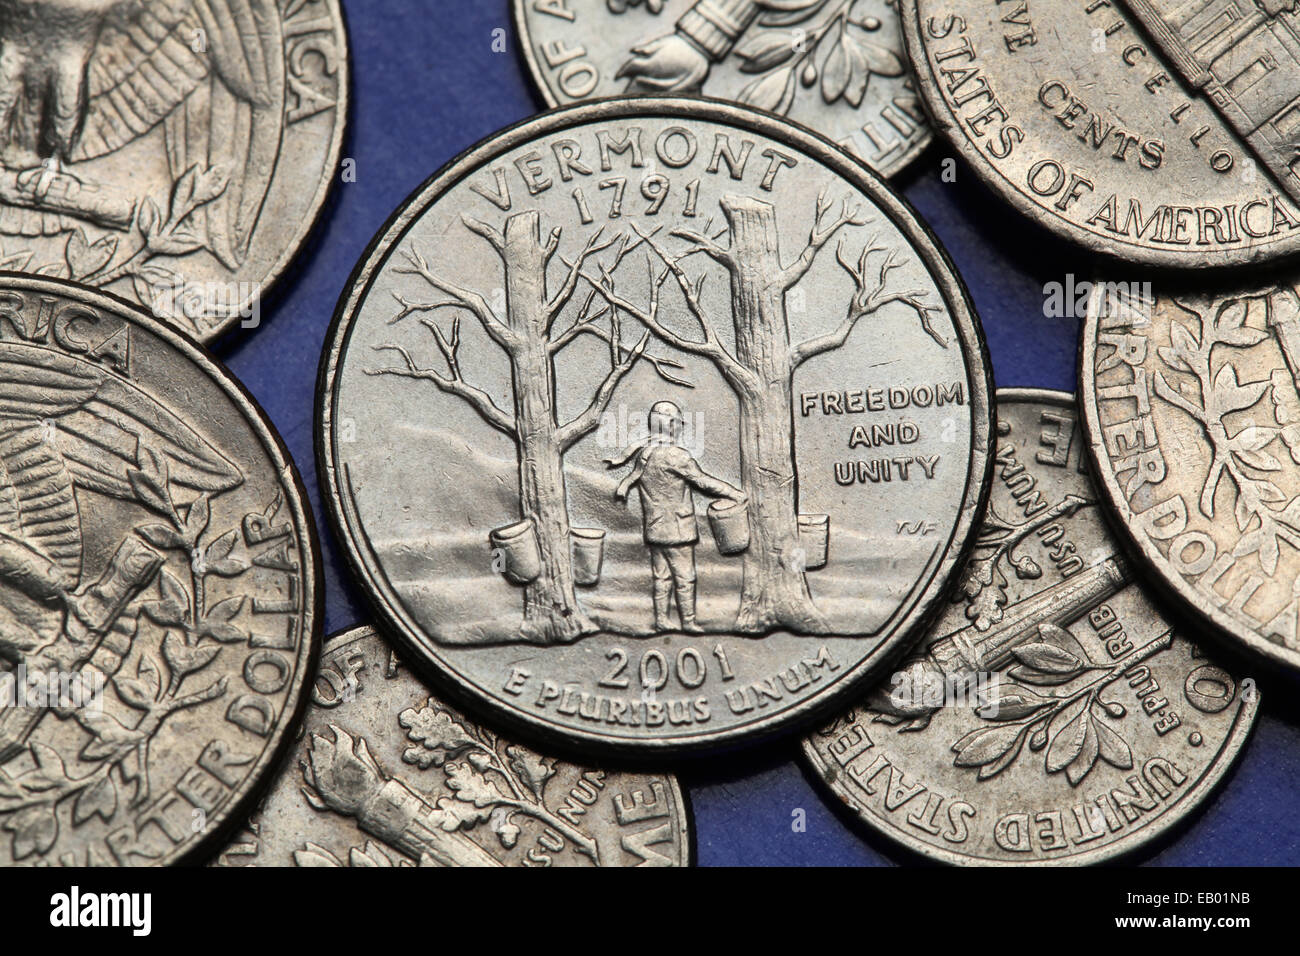 Coins of USA. Maple trees with sap buckets and Camel's Hump Mountain depicted on the US Vermont quarter (2001). Stock Photo